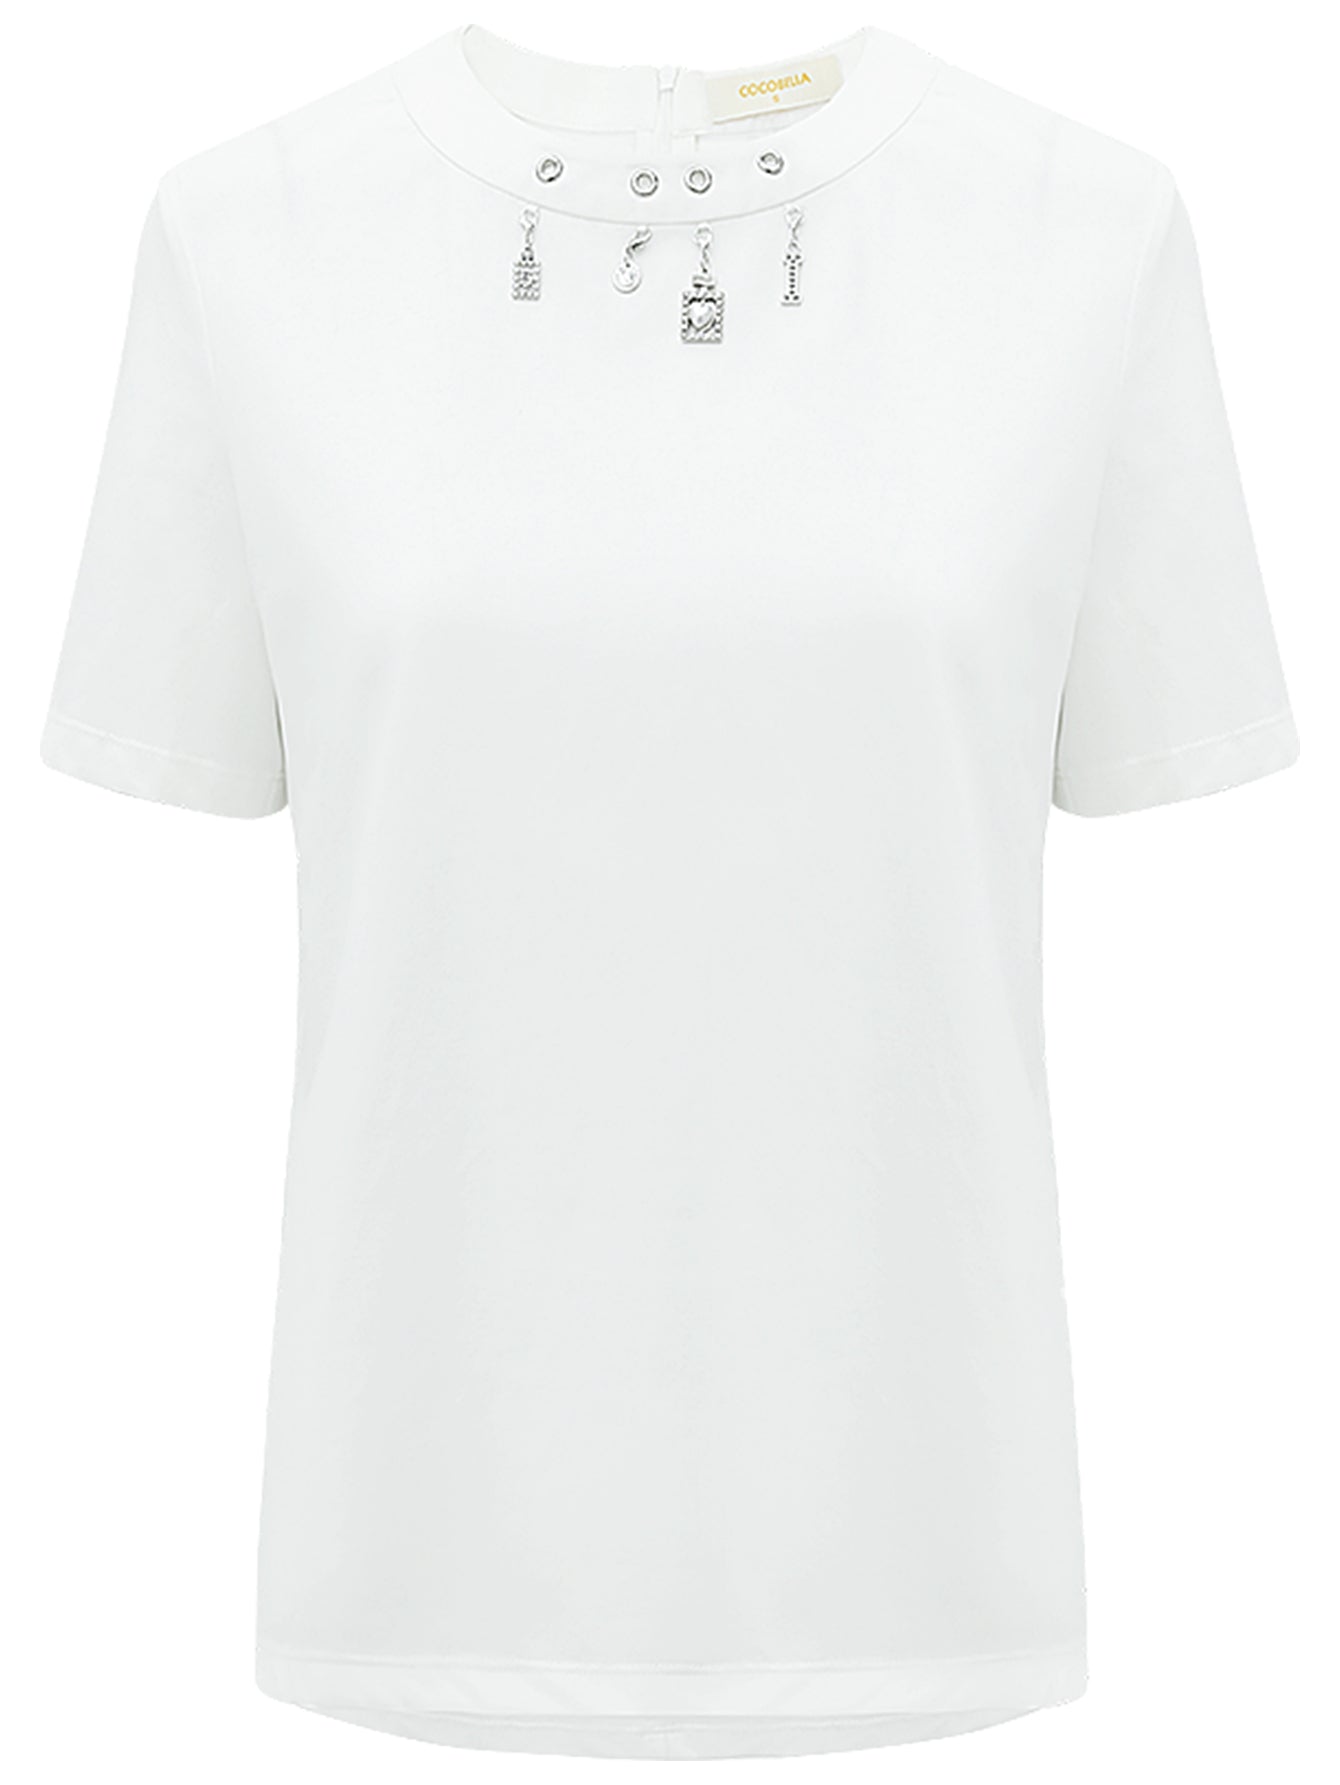 white-round-neck-tee-with-embellished-charms_all_white_4.jpg